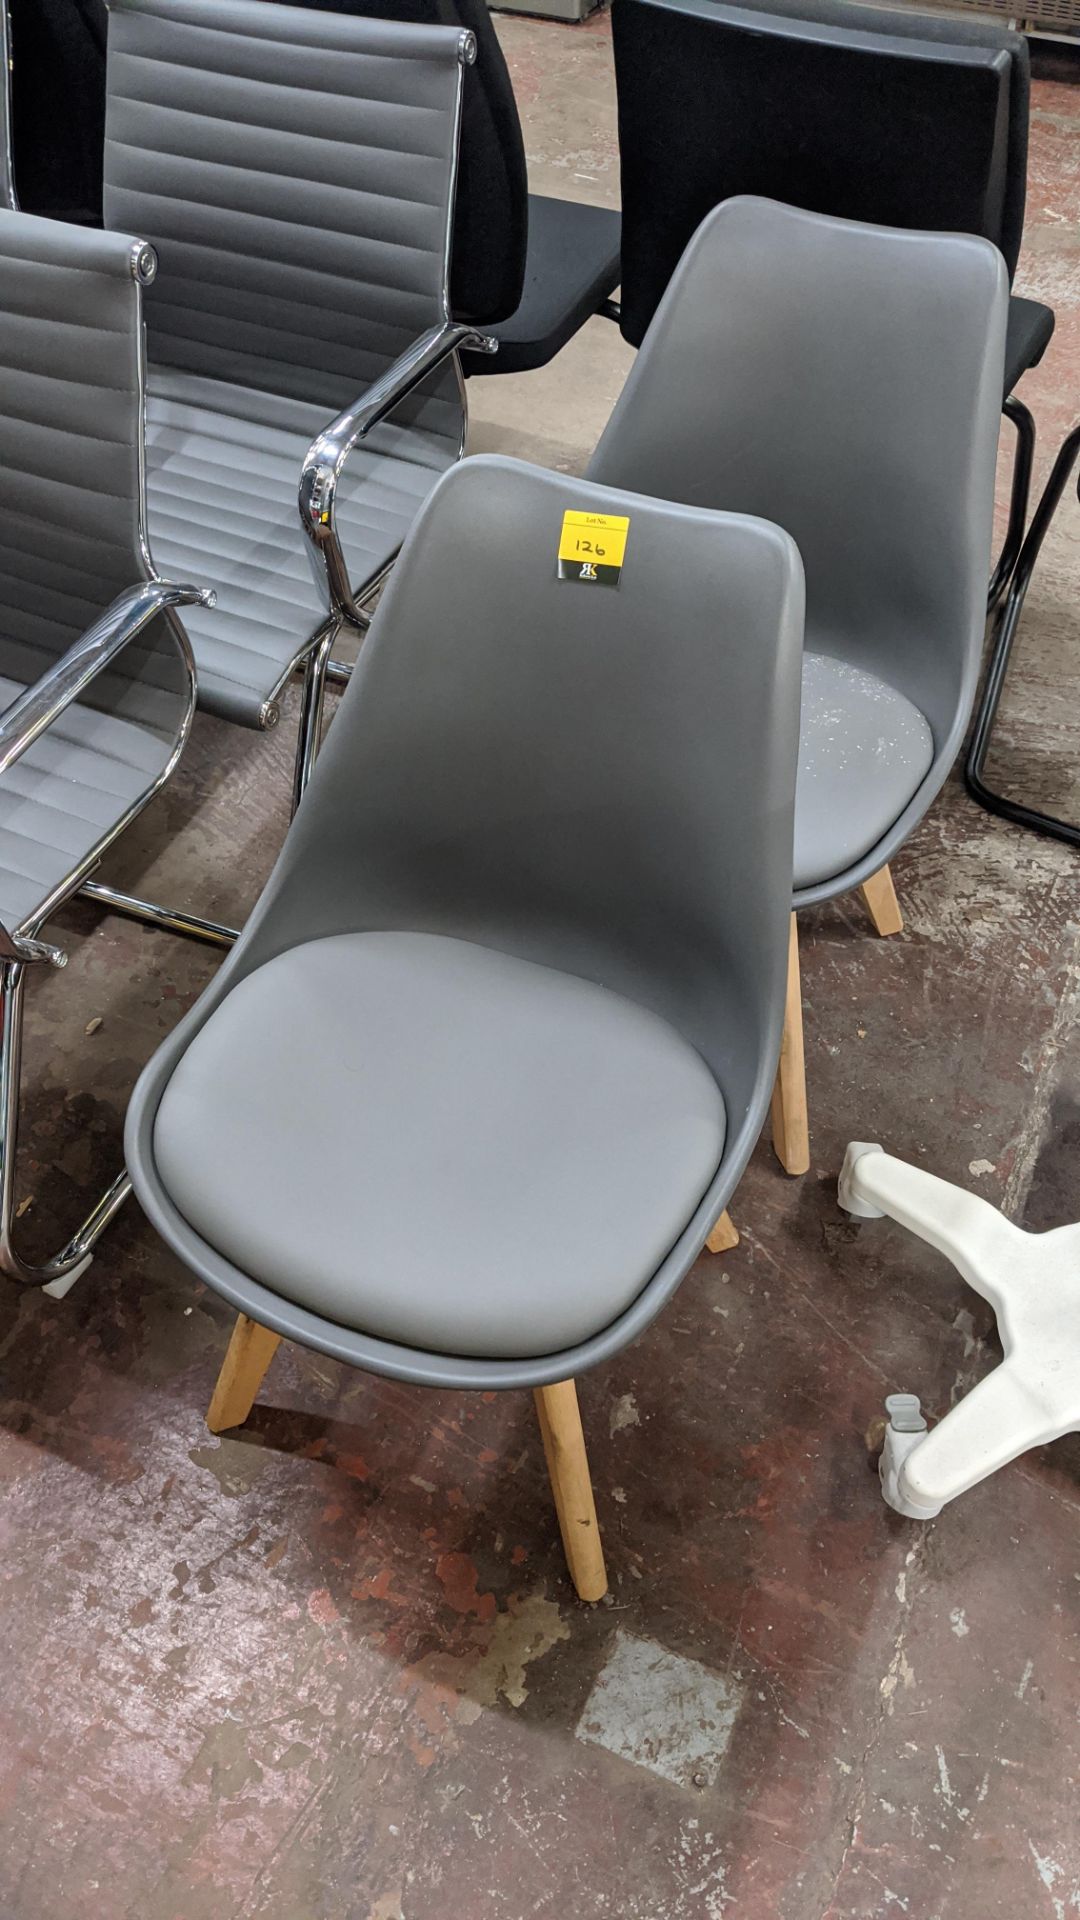 Pair of matching modern chairs in pale grey on wooden legs. This is one of a small number of lots